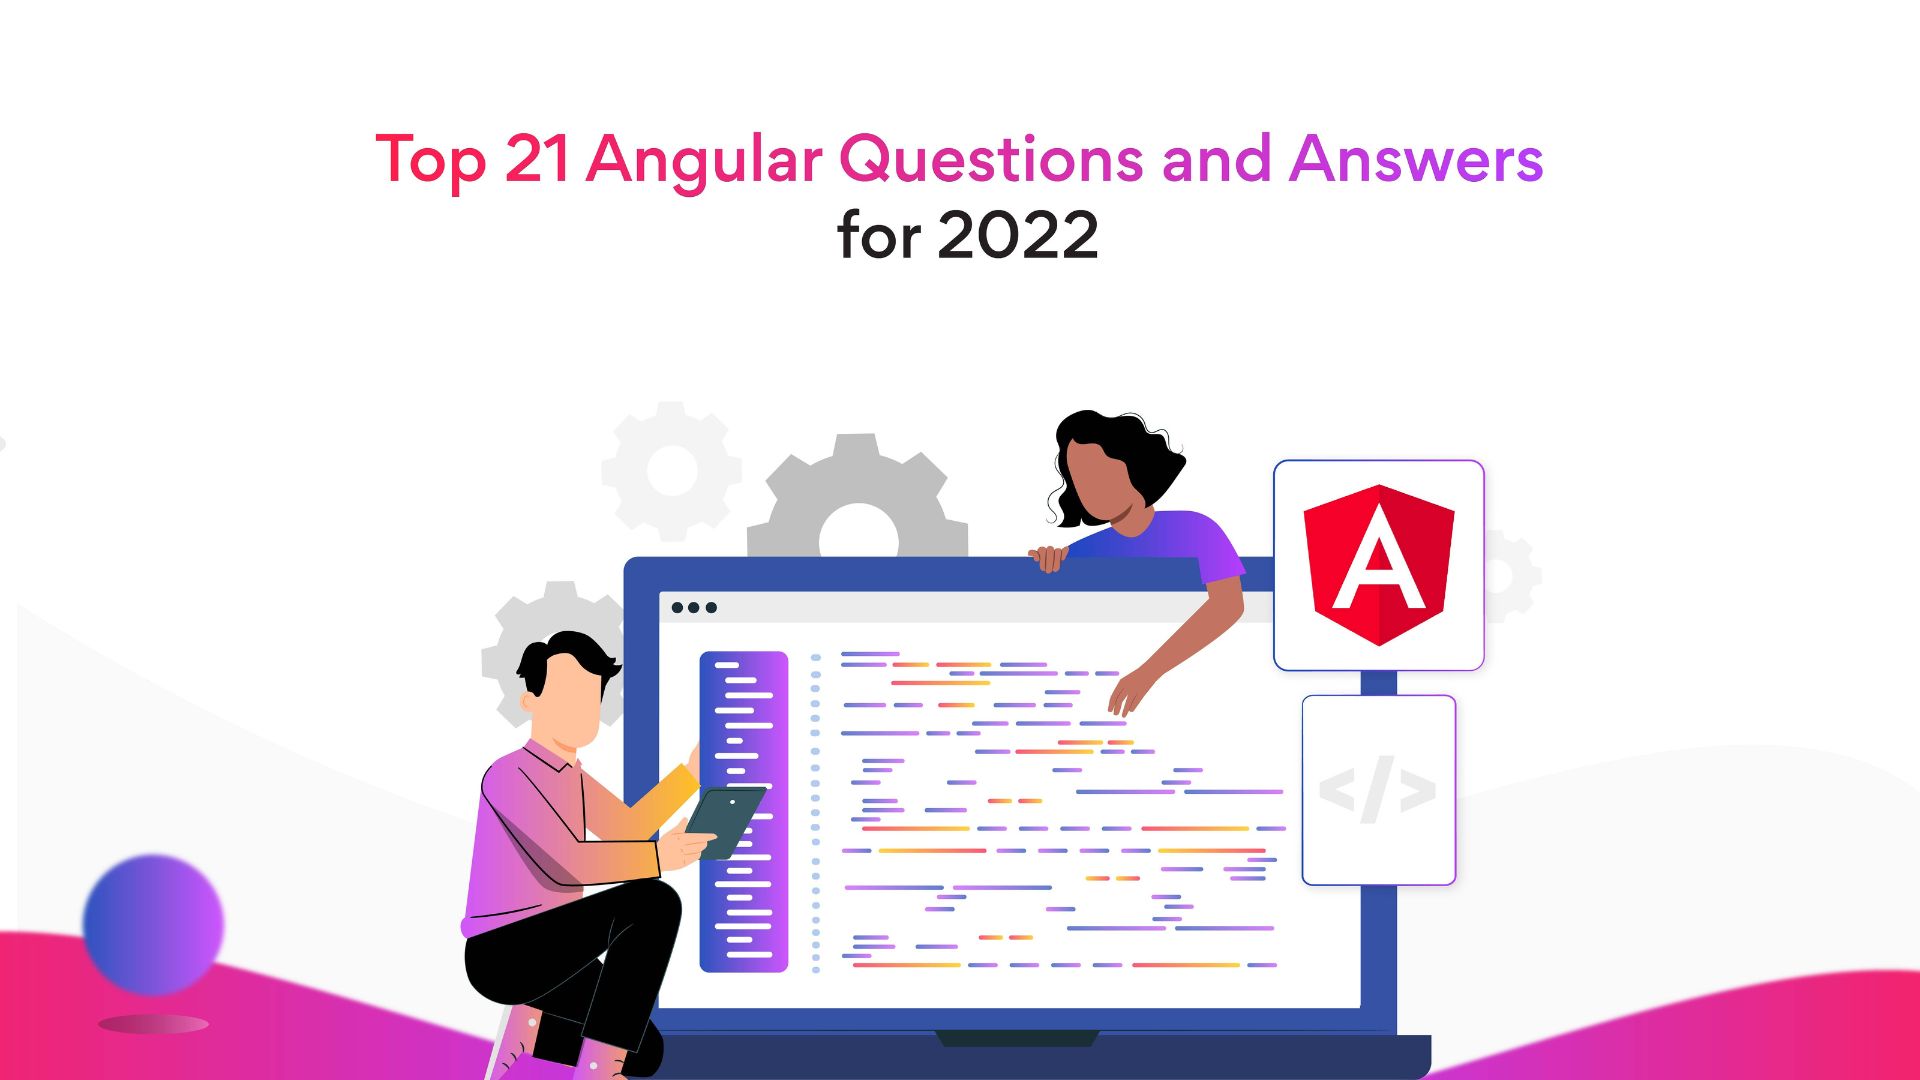 Top 21 Angular questions and answers for 2022